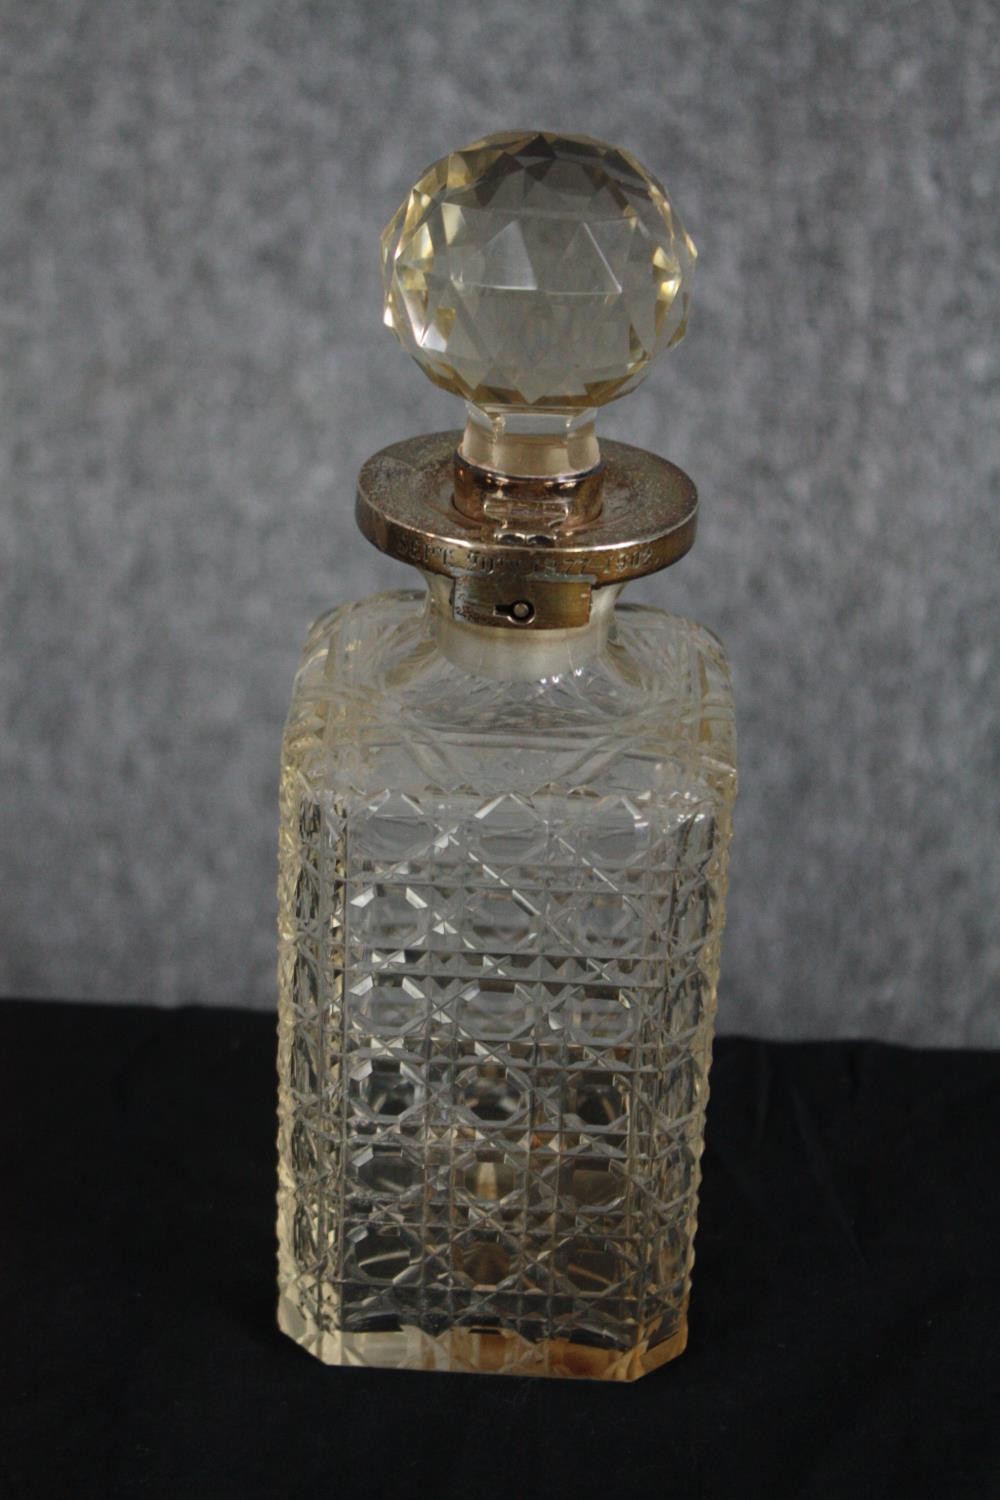 A rare antique cut glass decanter with silver Betjemann's patent lock. Missing its key but unlocked.